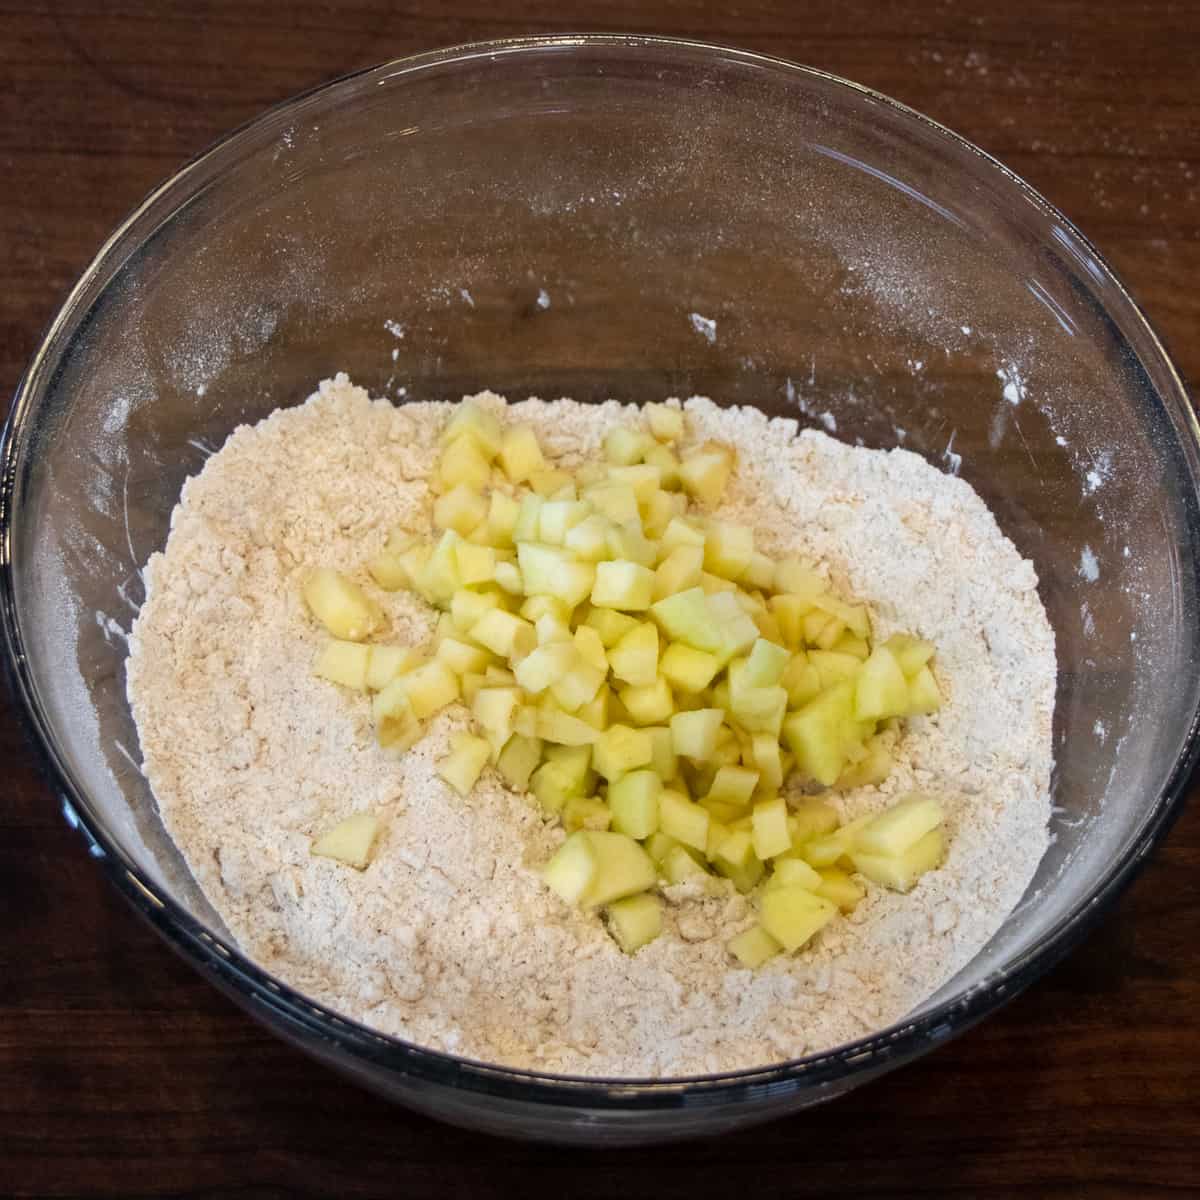 A bowl of the flour and butter mixture with the diced apples on top.